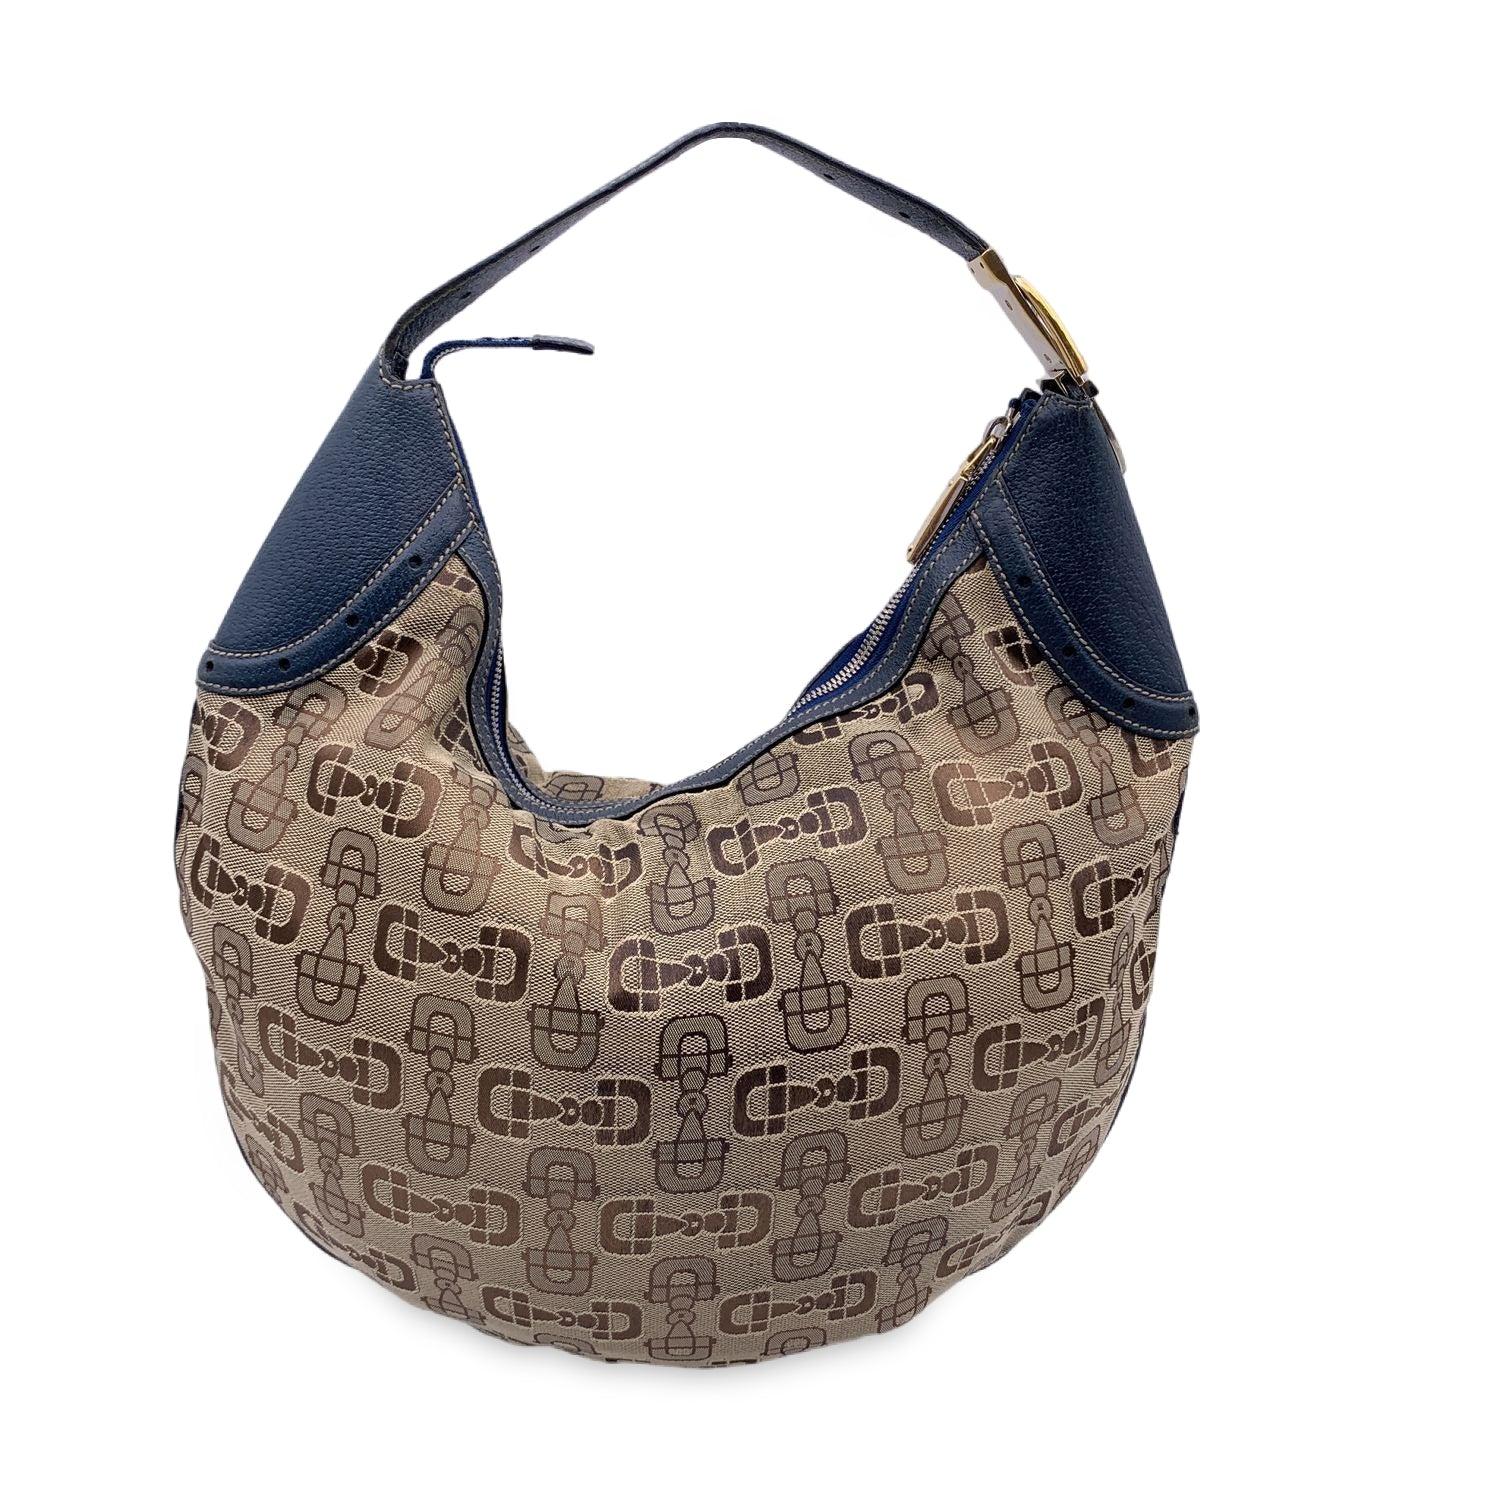 Gucci Beige Canvas Horsebit Print Glam Hobo Shoulder Bag In Excellent Condition For Sale In Rome, Rome